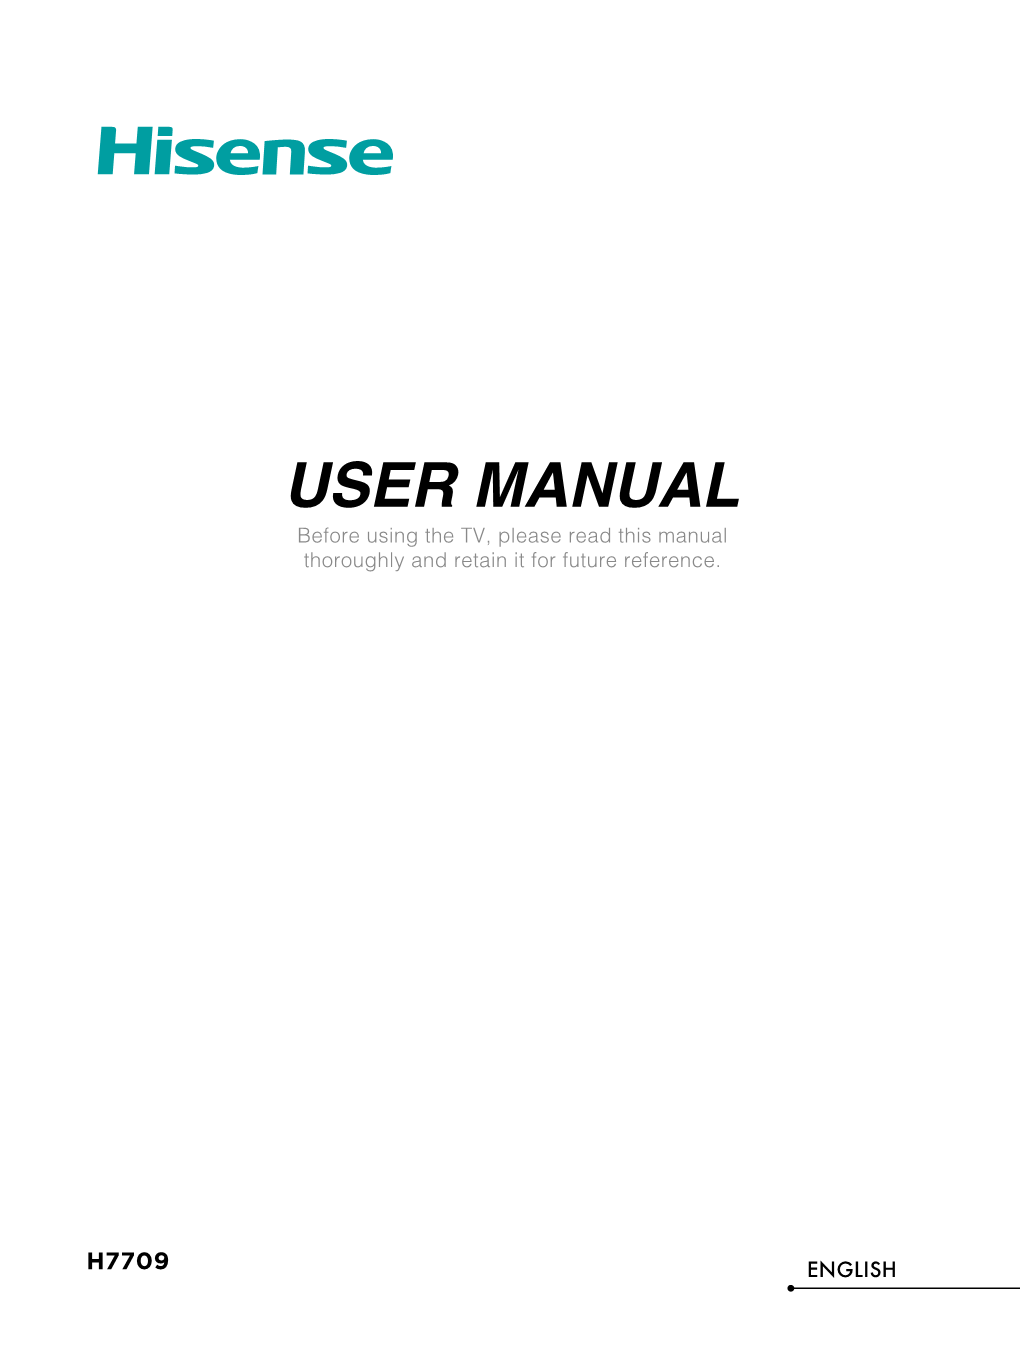 USER MANUAL Before Using the TV, Please Read This Manual Thoroughly and Retain It for Future Reference